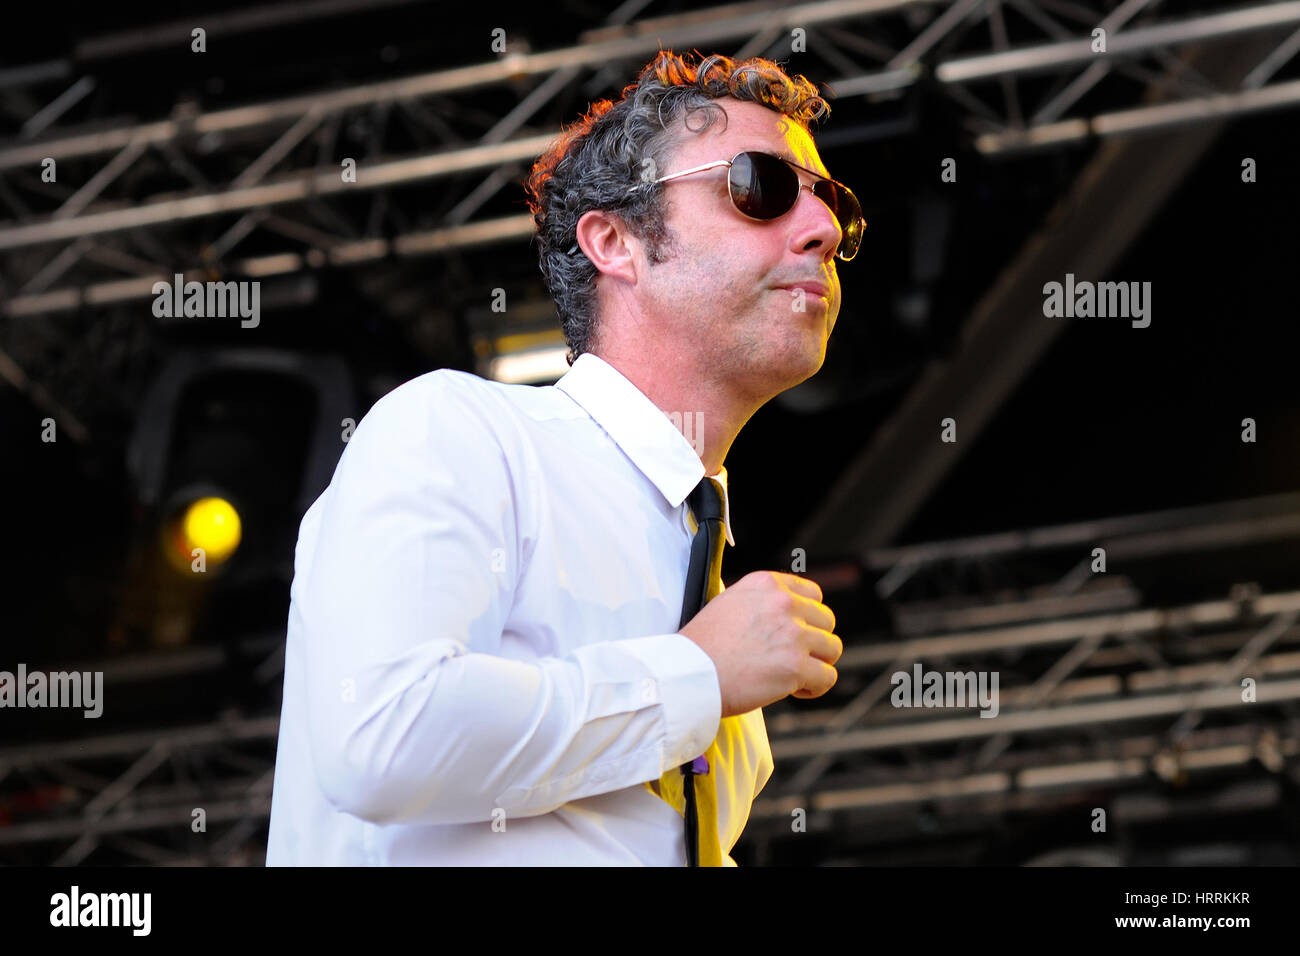 BARCELONA - MAY 31: Baxter Dury, singer and songwriter, performs at San Miguel Primavera Sound Festival on May 31, 2012 in Barcelona, Spain. Stock Photo